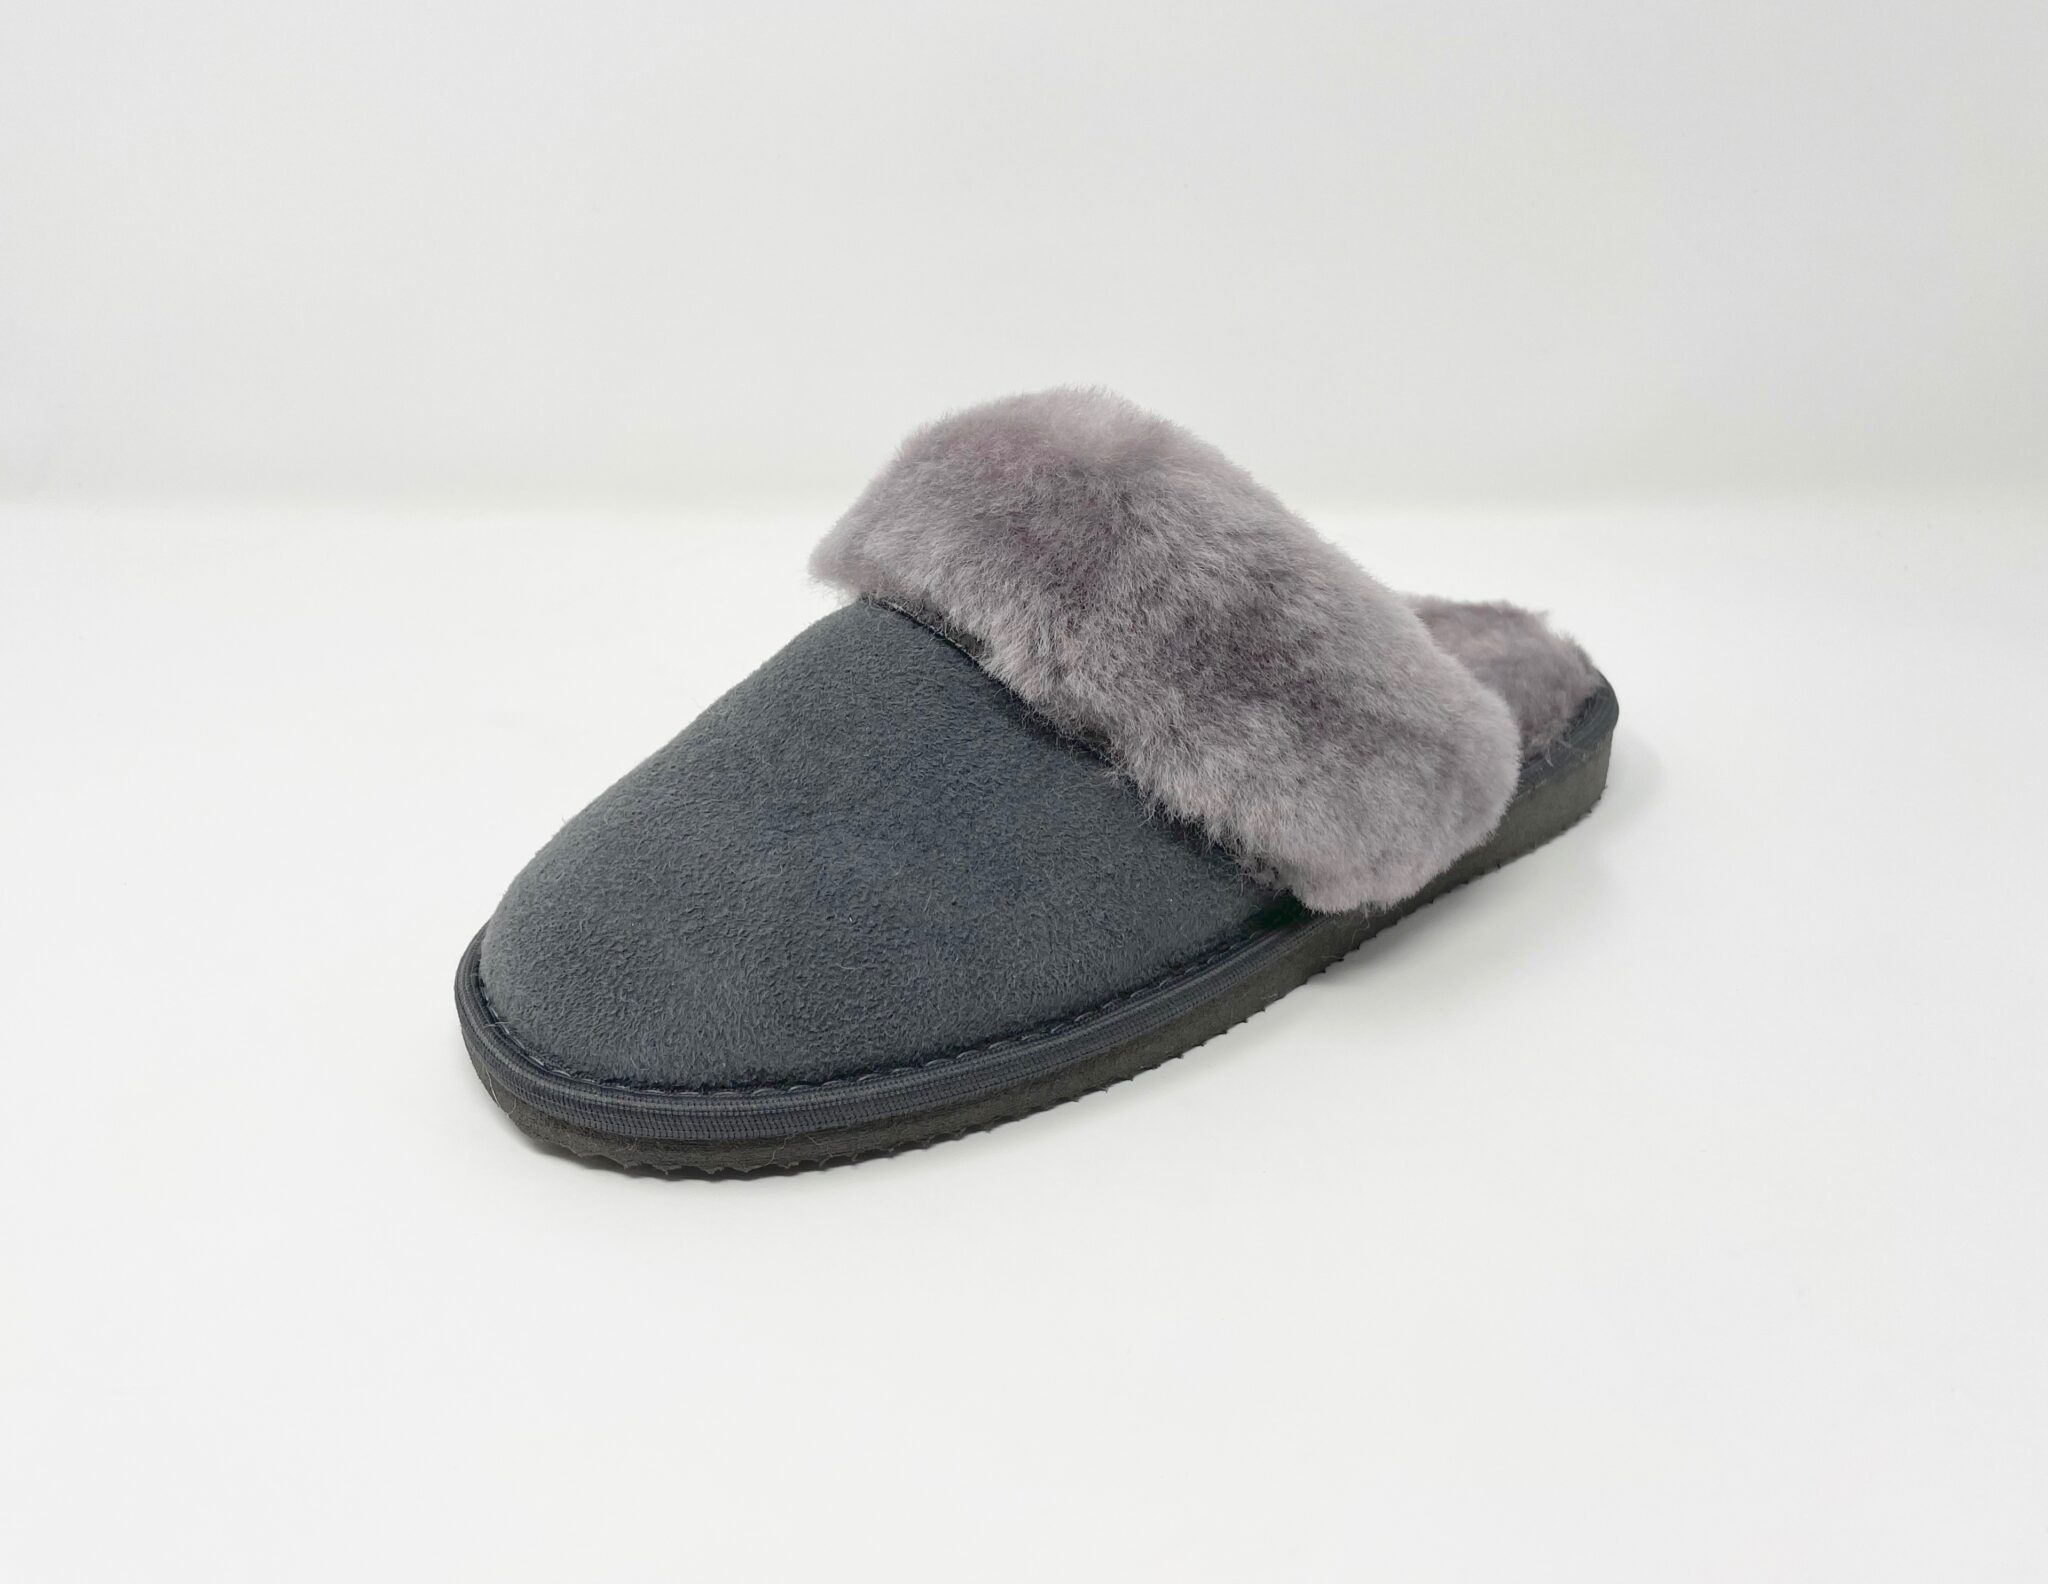 Luna Grey Sheepskin slippers 100% made of real Sheepskin and Leather ...